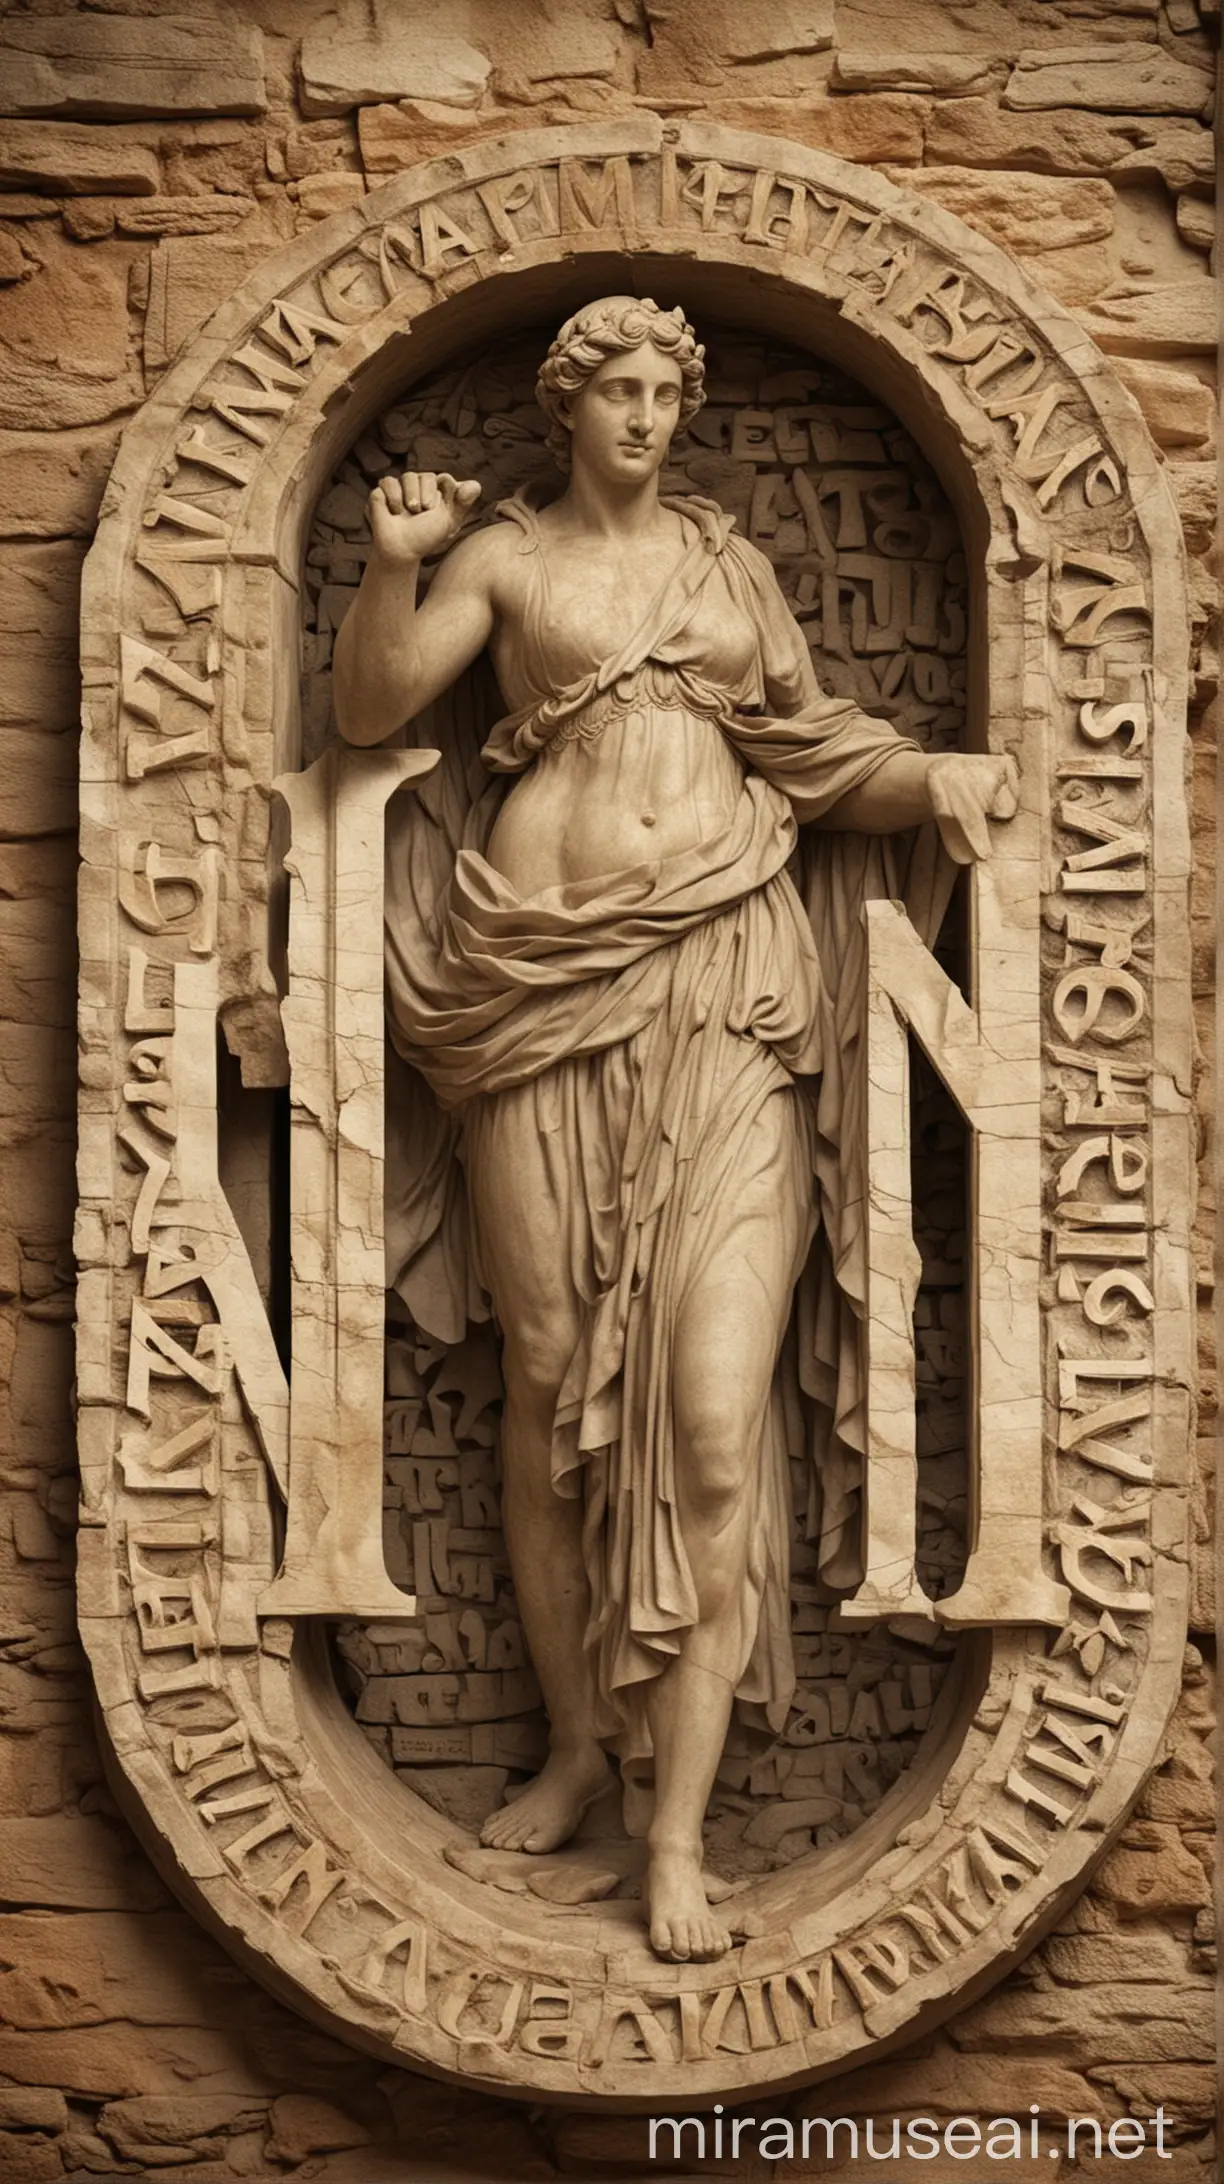 Create an image depicting the etymology of the name 'Amplias,' highlighting its Latin origin. Show the word 'Amplias' evolving from 'Ampliatus,' with visual elements representing the meaning 'enlarged.' Use classical Roman lettering and subtle historical context in the background."In the ancient world 